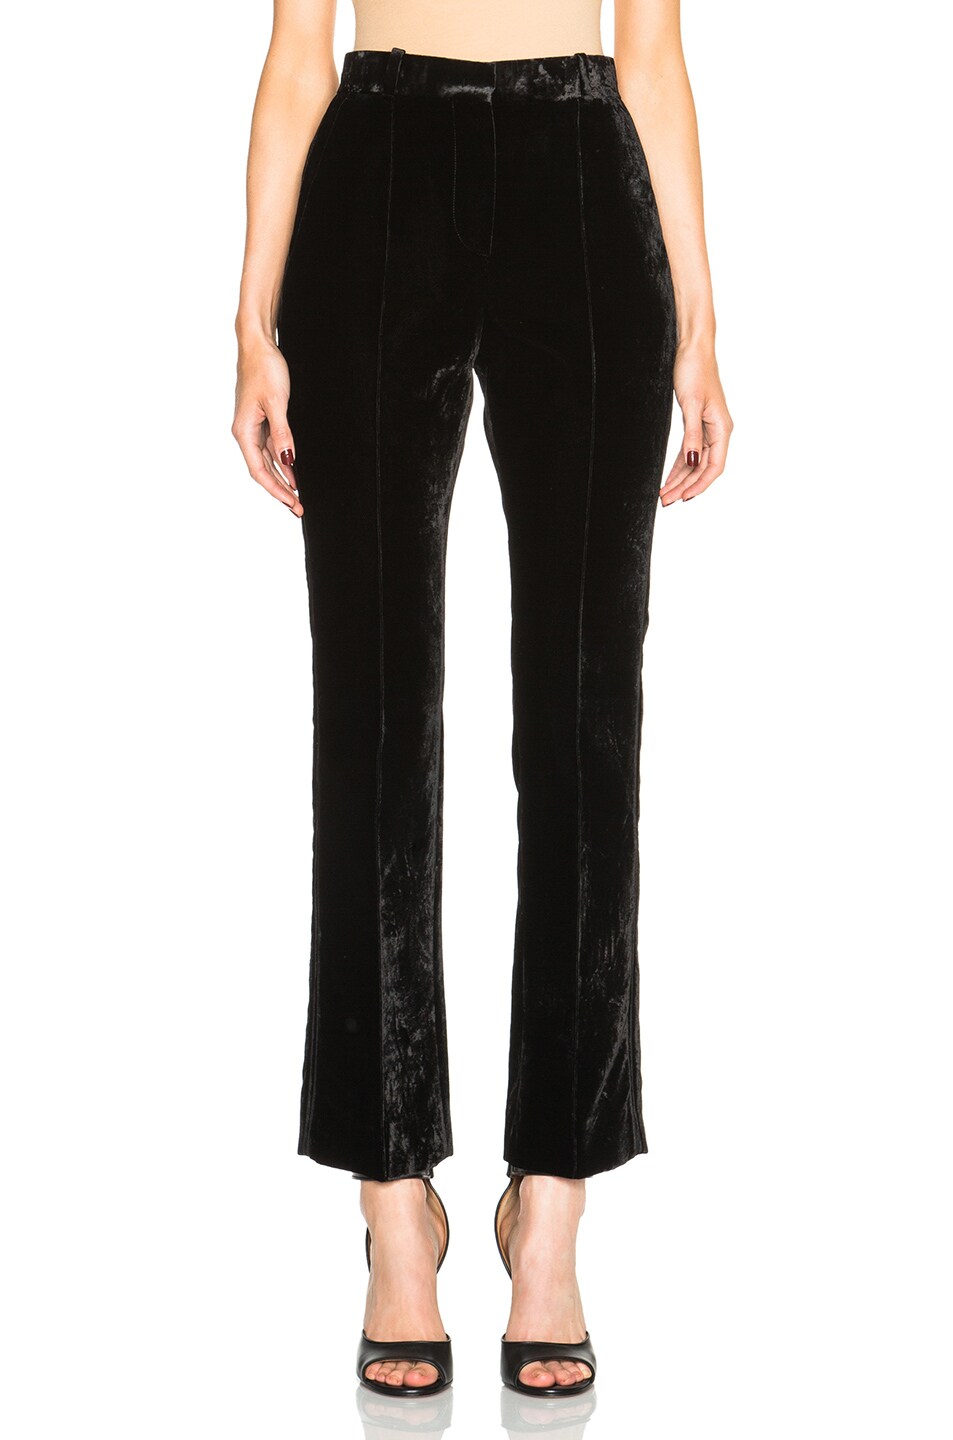 Givenchy Crushed Velvet Trousers in Black | FWRD